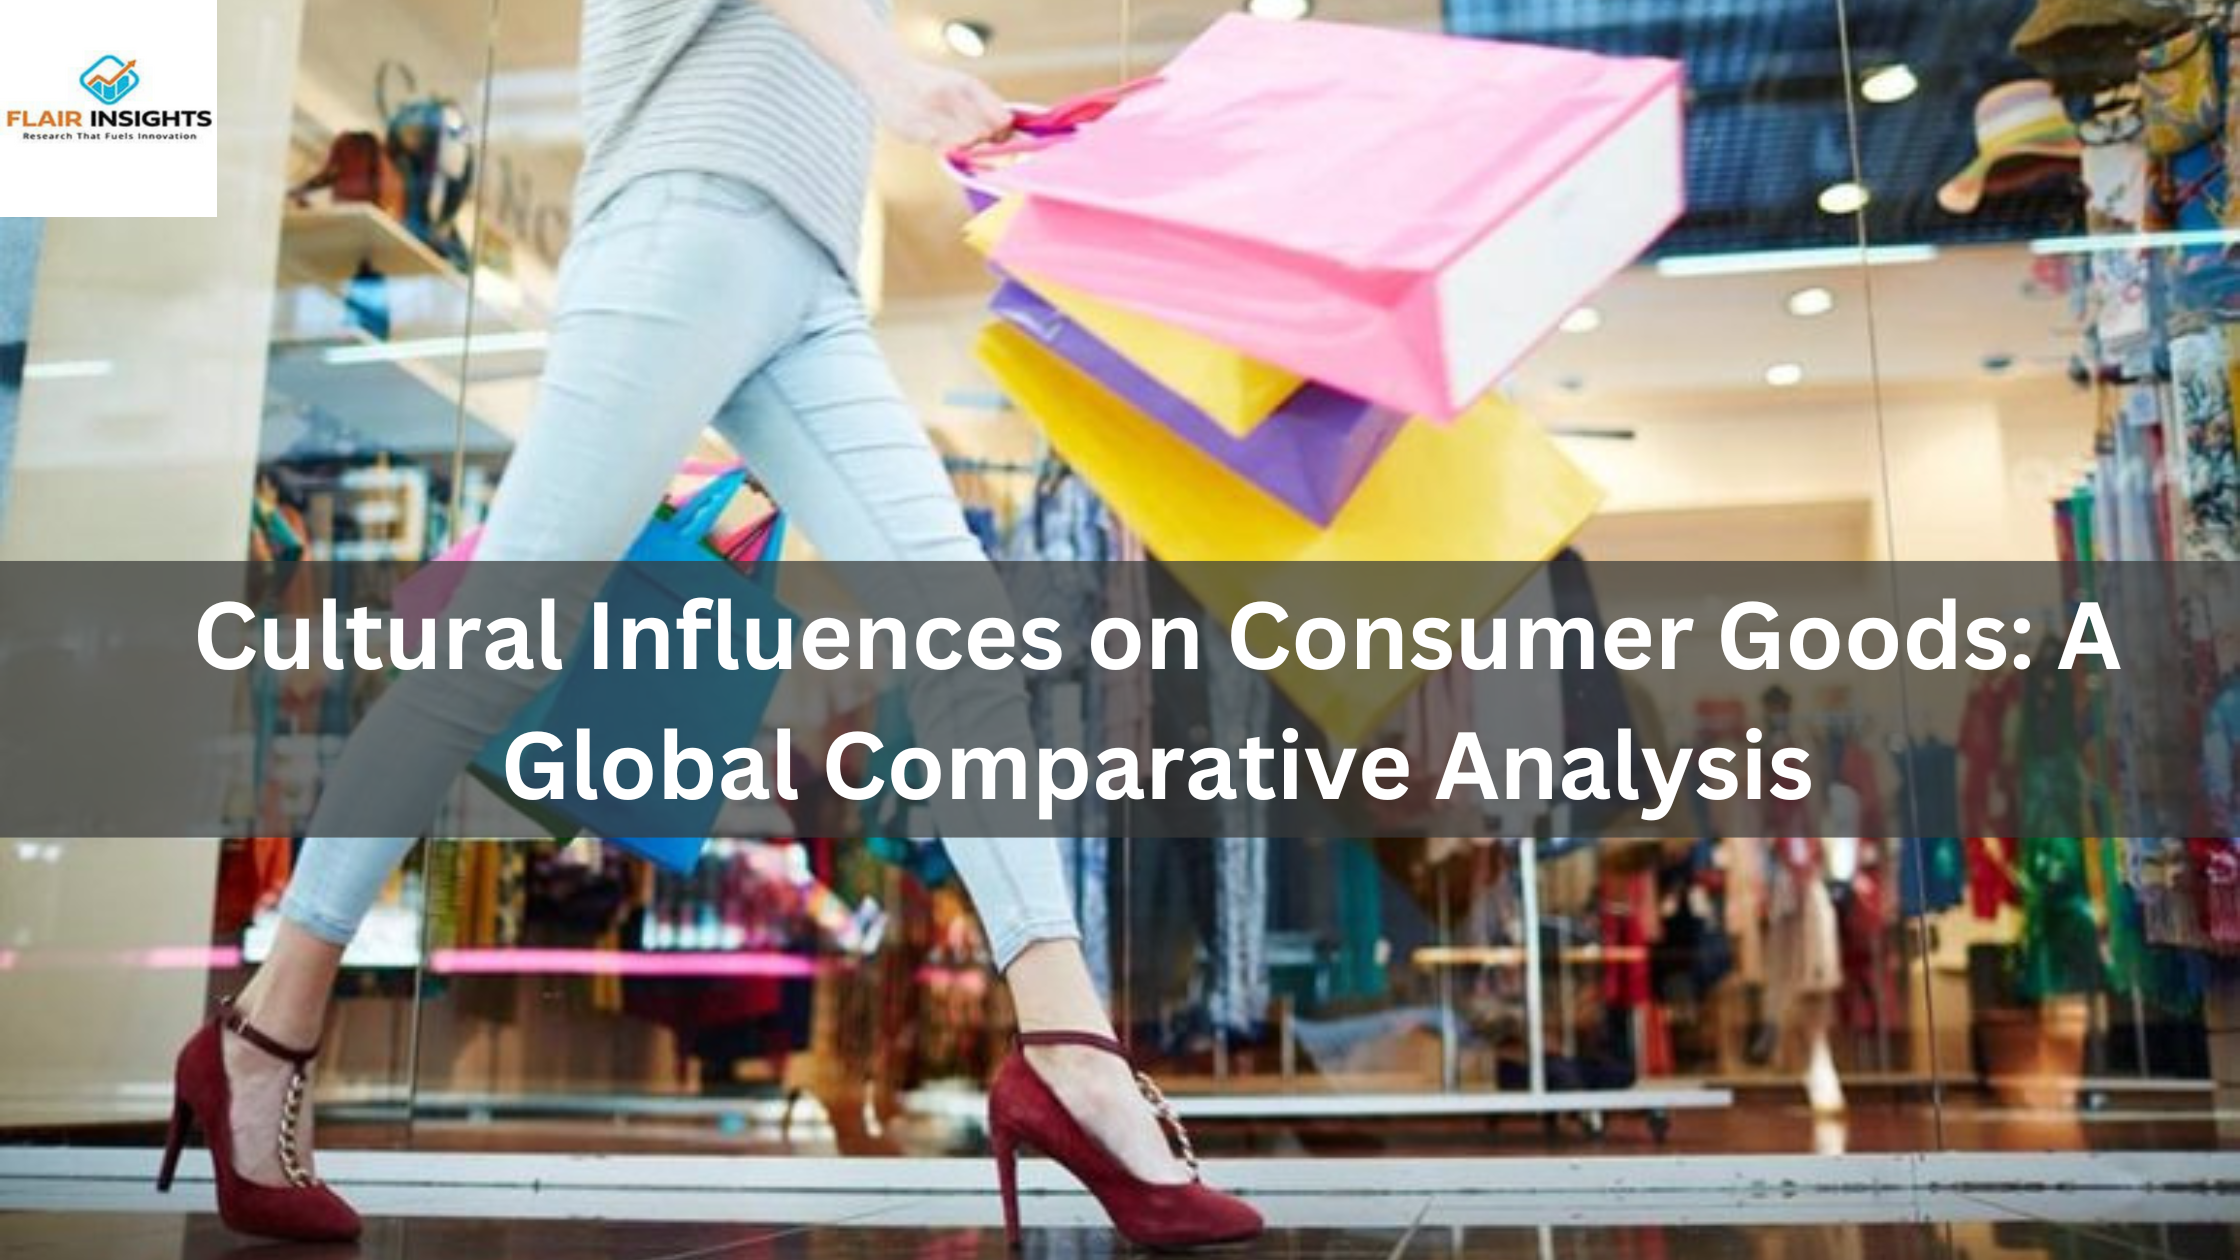 Cultural Influences on Consumer Goods: A Global Comparative Analysis